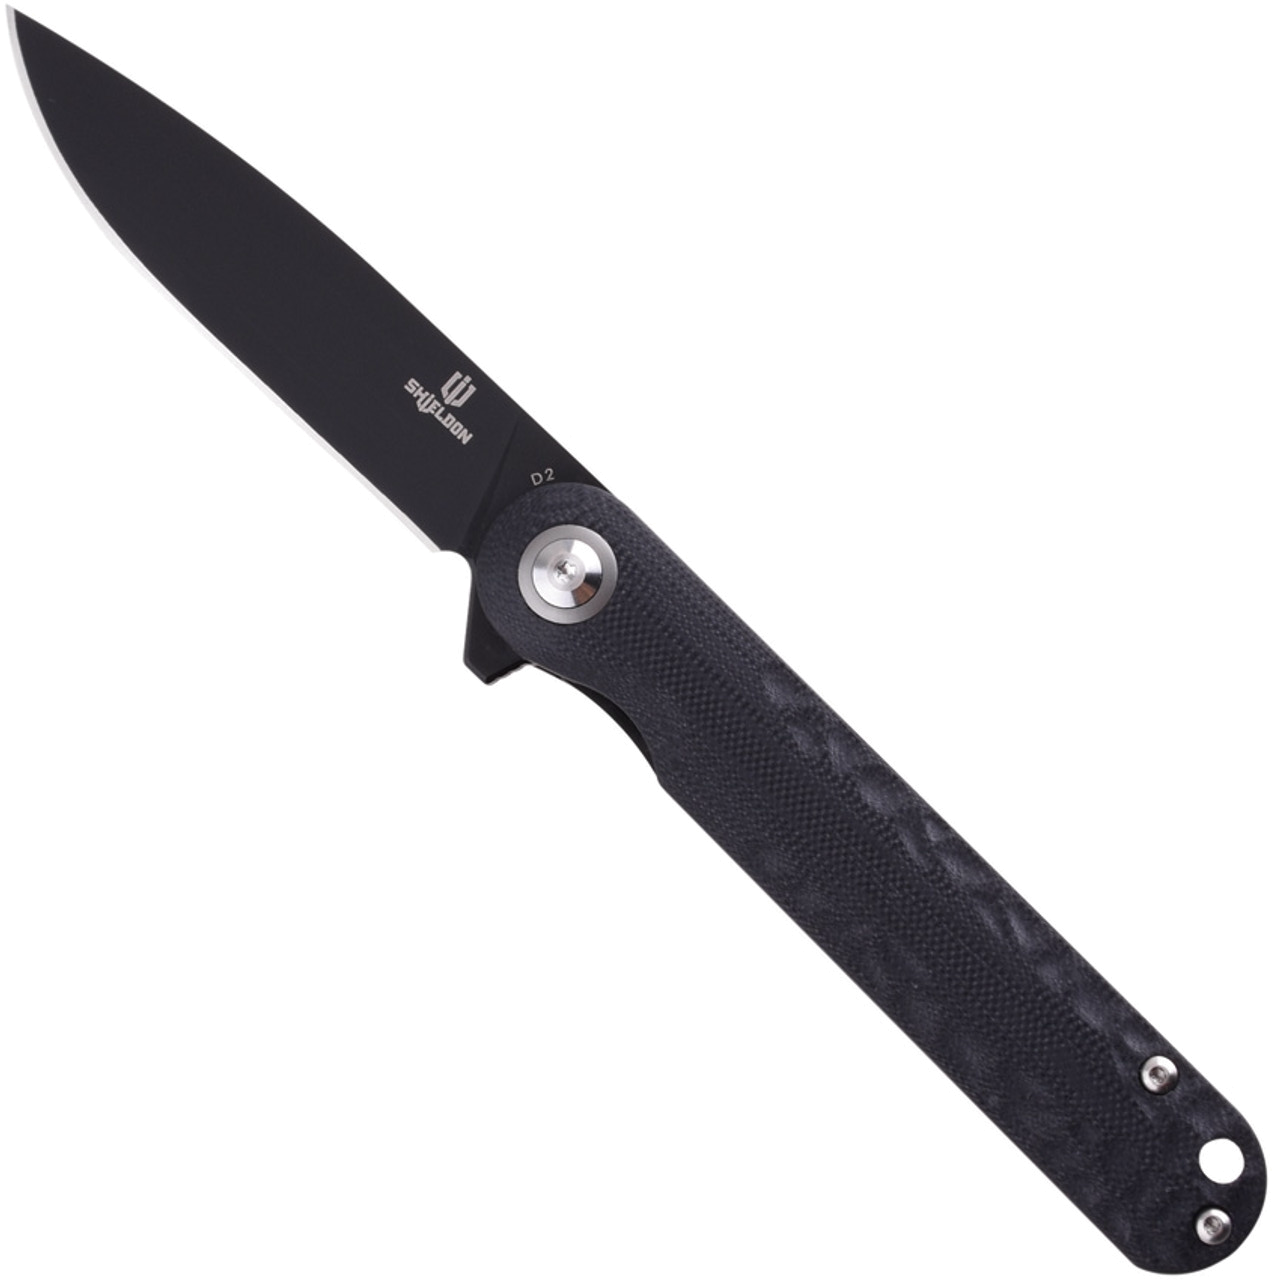 product image for Shieldon Empoleon Black G10 Handle Linerlock 3.5" Model Number (if available)